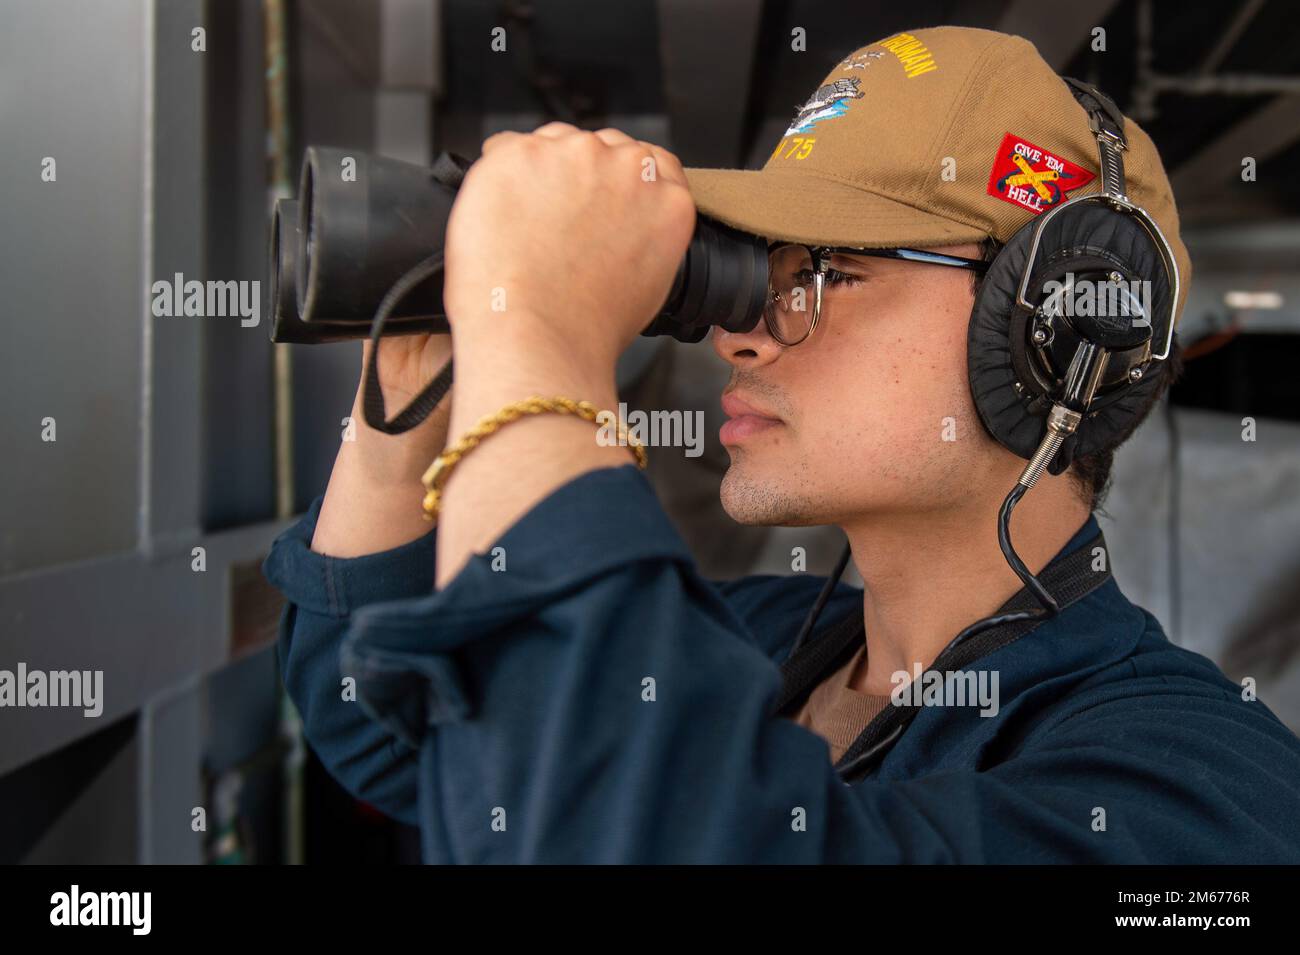 220410-N-CY569-1158 IONIAN SEA (April 10, 2022) Seaman Mario Martinez, from Bayamon, Puerto Rico, stands lookout watch on the fantail of the Nimitz-class aircraft carrier USS Harry S. Truman (CVN 75), April 10, 2022. The Harry S. Truman Carrier Strike Group is on a scheduled deployment in the U.S. Sixth Fleet area of operations in support of U.S., allied and partner interests in Europe and Africa. Stock Photo